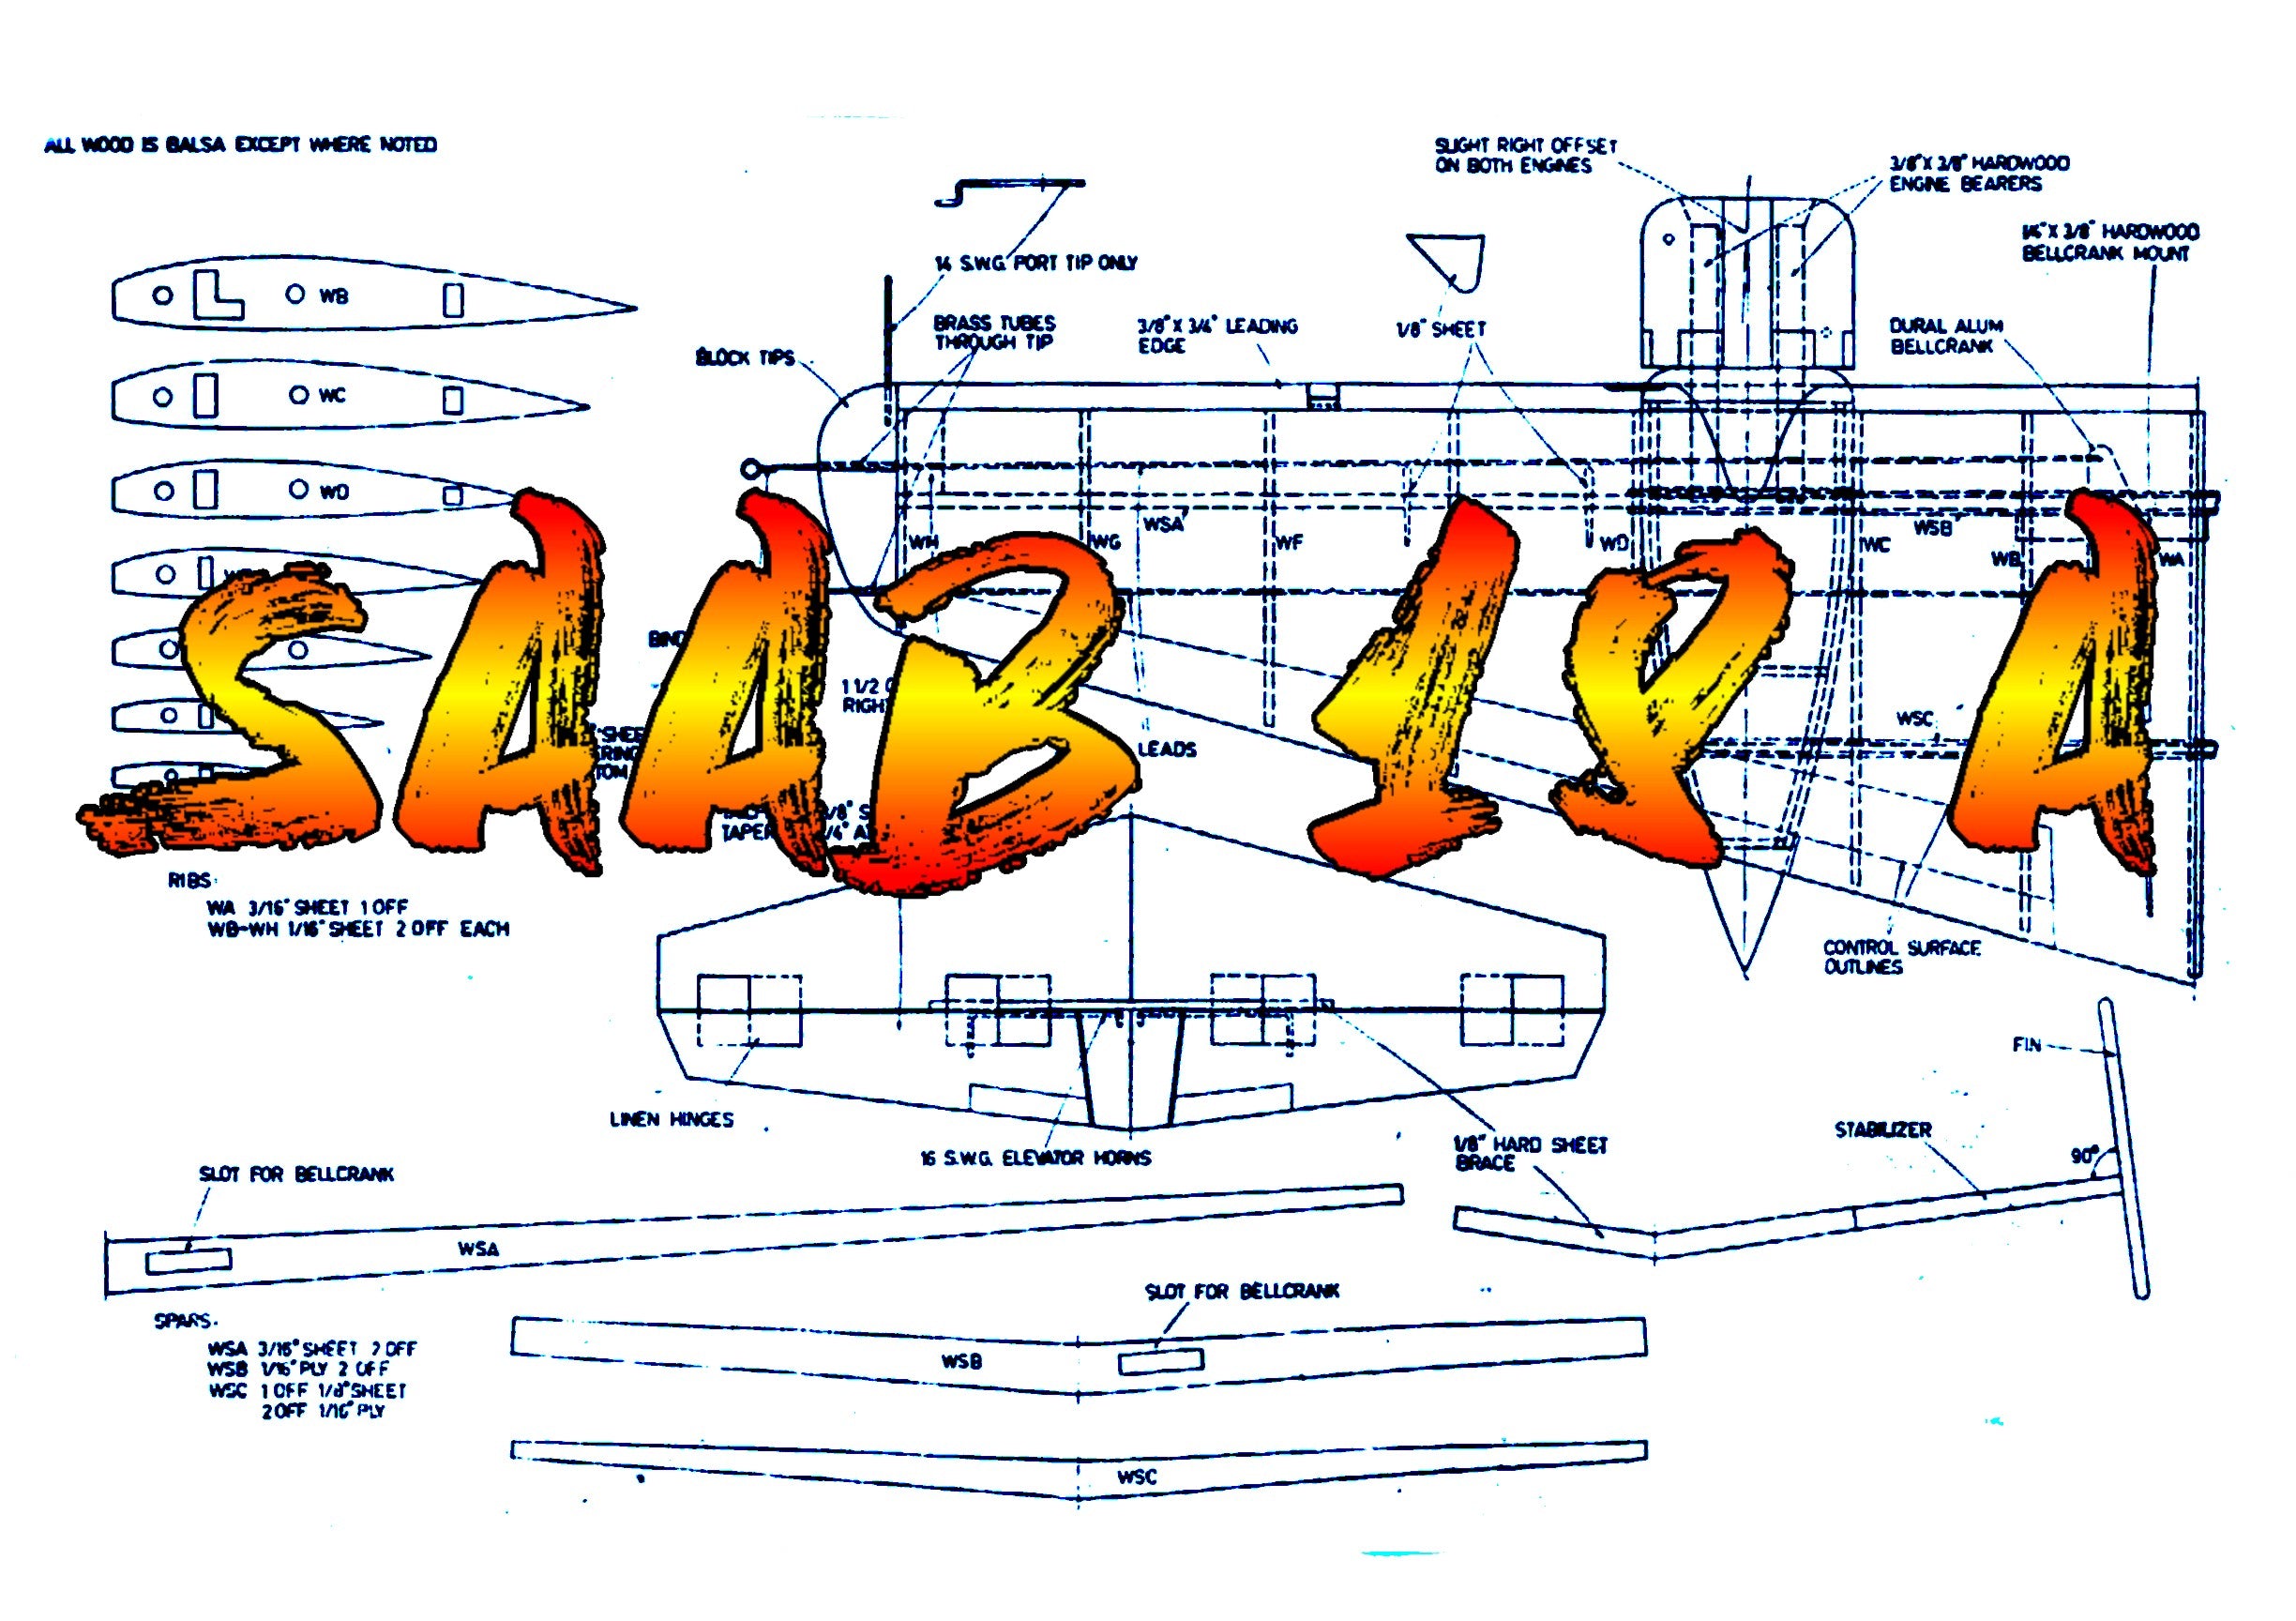 full size printed plans scale 1:16 control line saab-i8a twin engine medium bomber